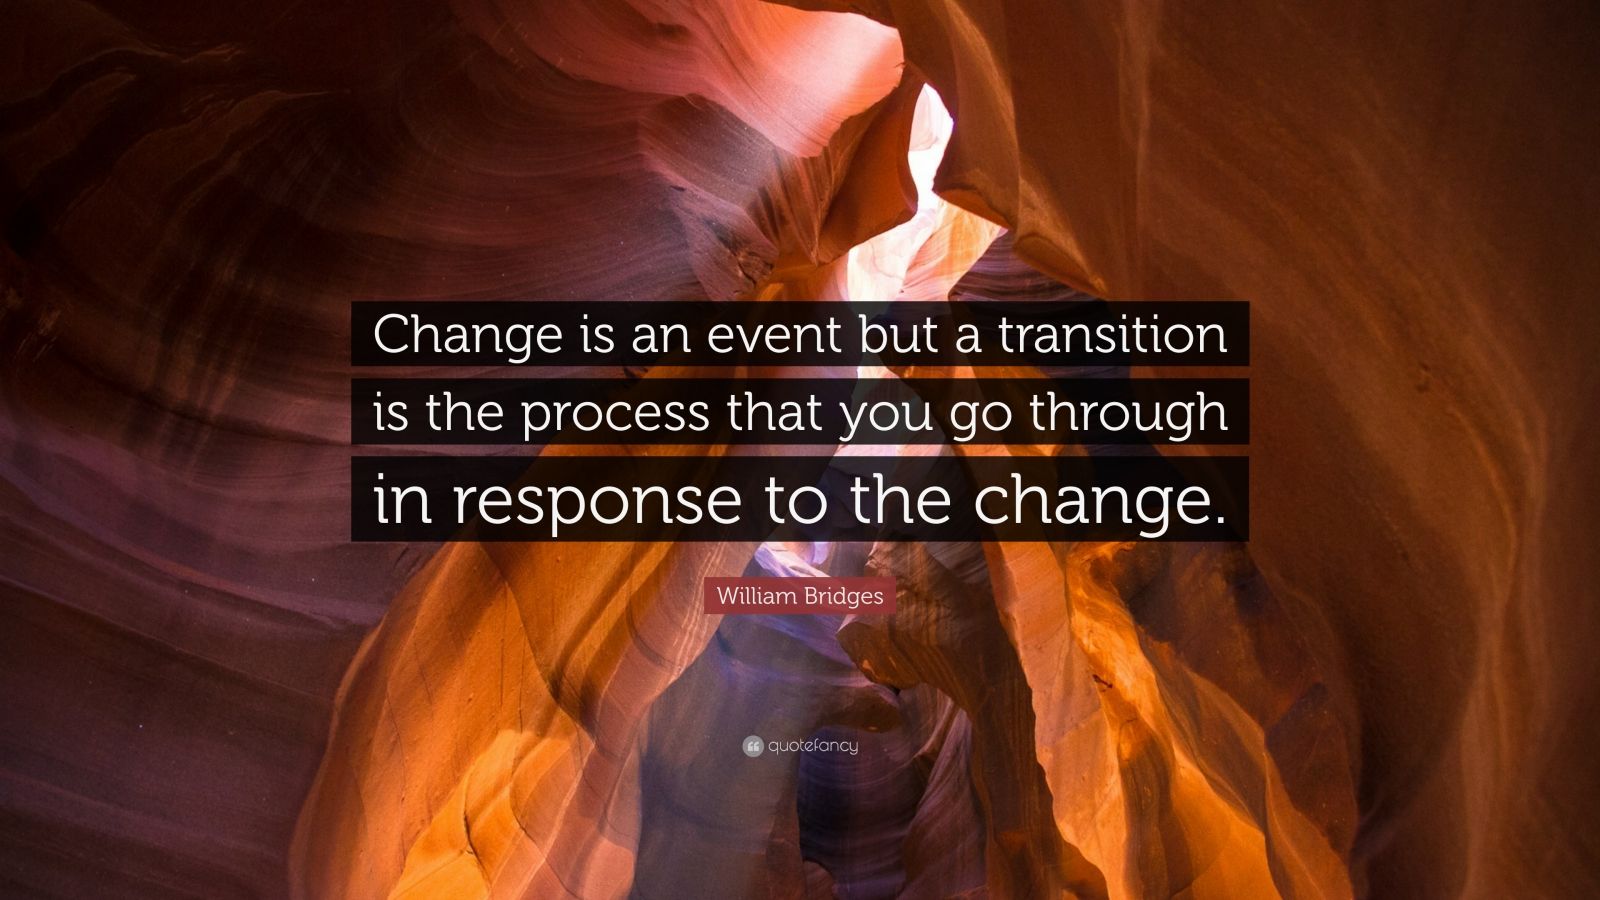 William Bridges Quote: “Change is an event but a transition is the ...